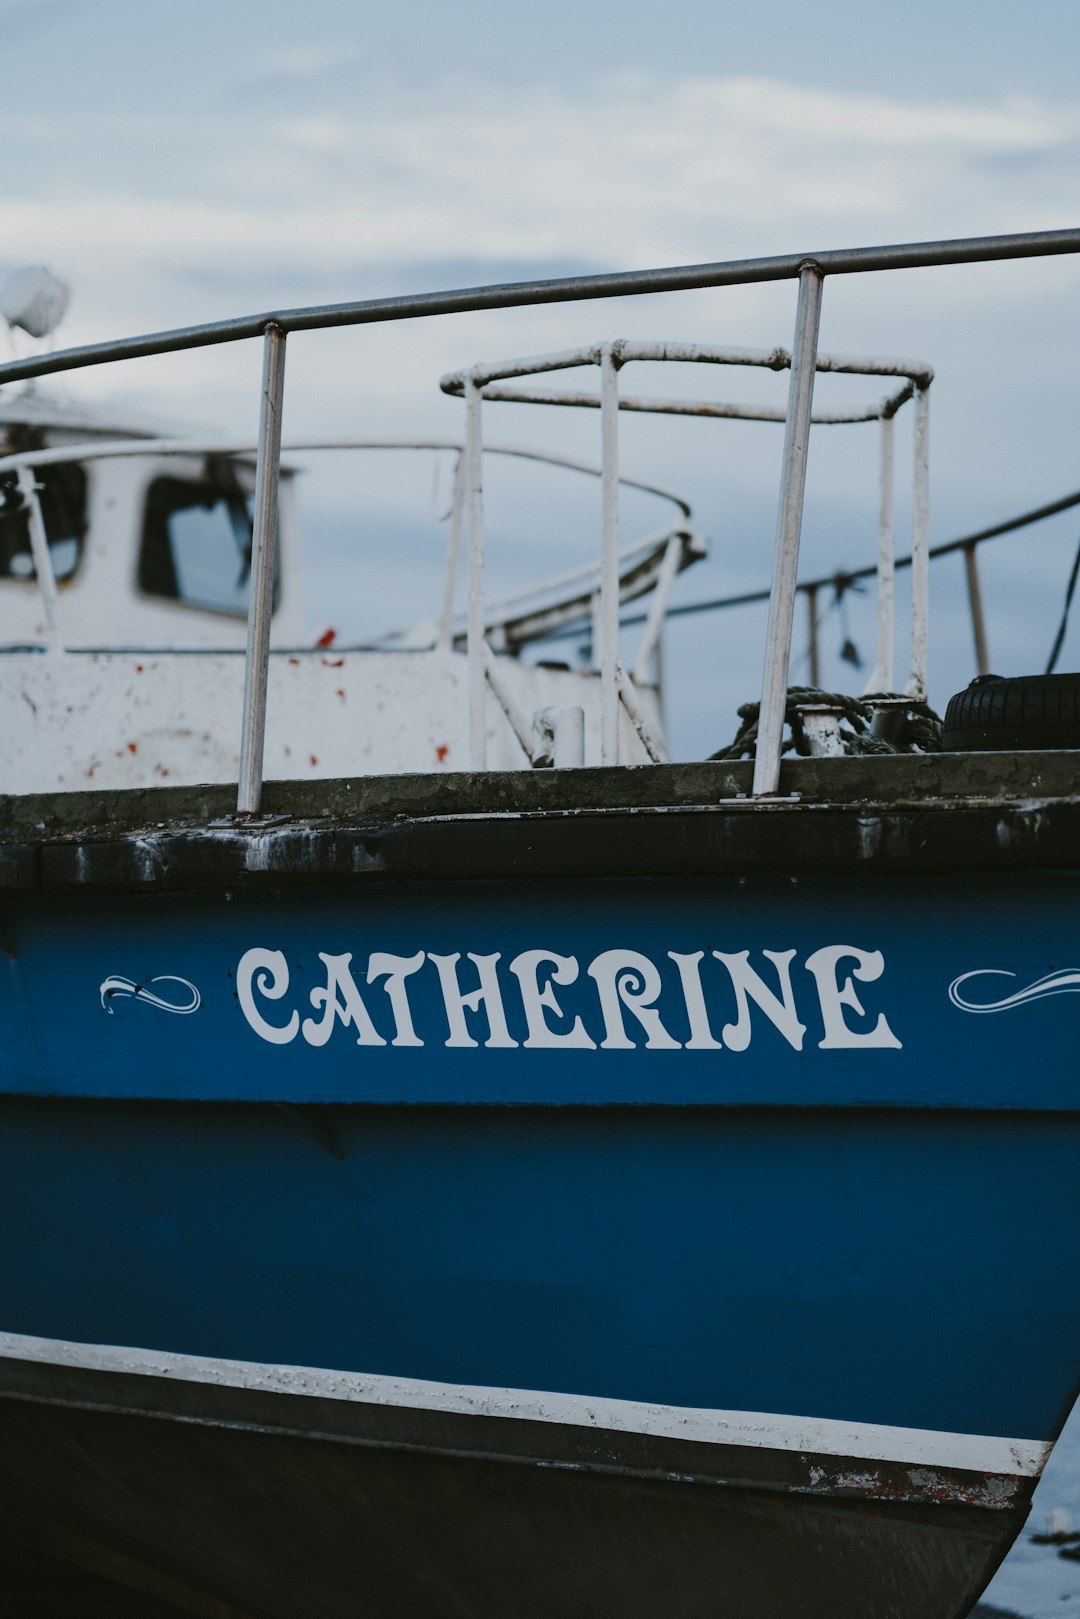 blue and white Catherine boat close-up photography